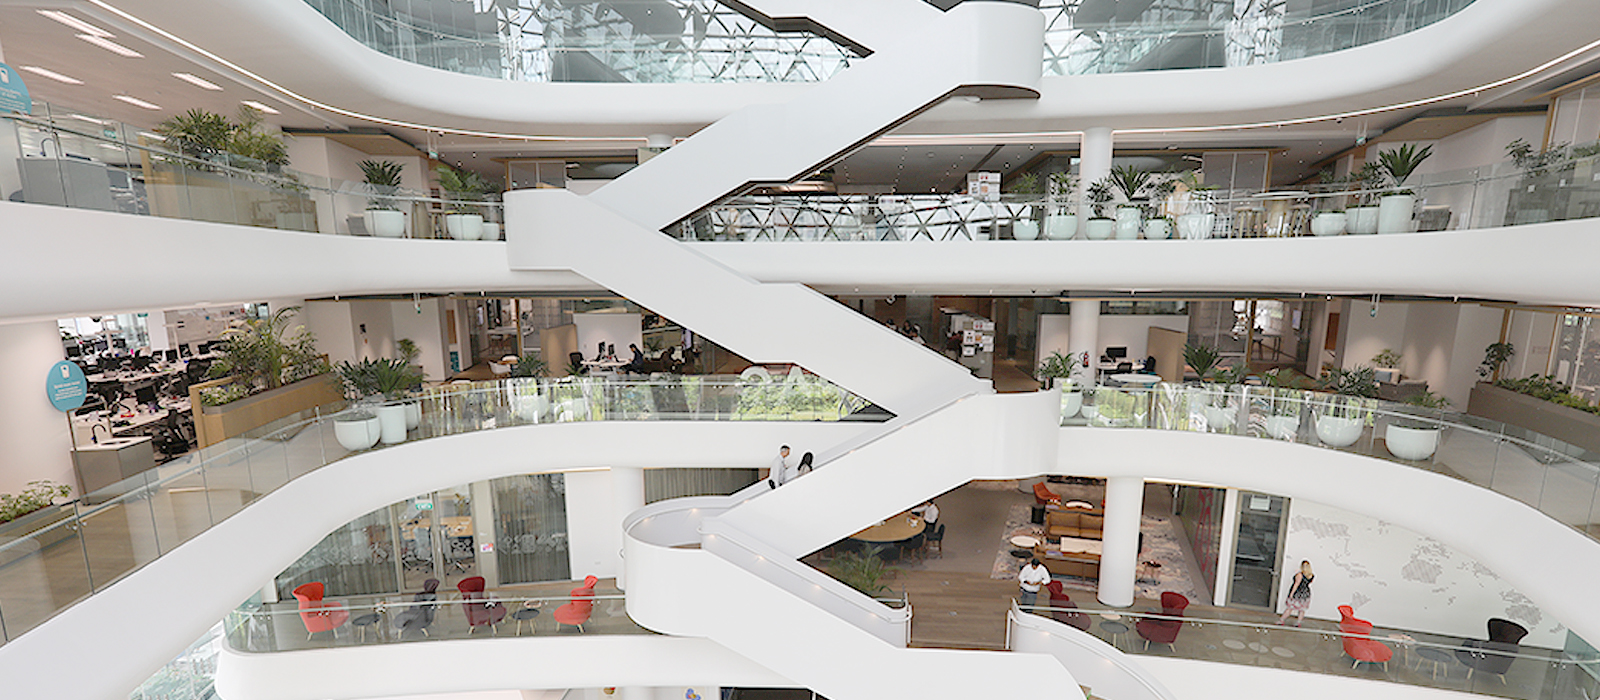 GSK's award-wining Asia House HQ in Singapore